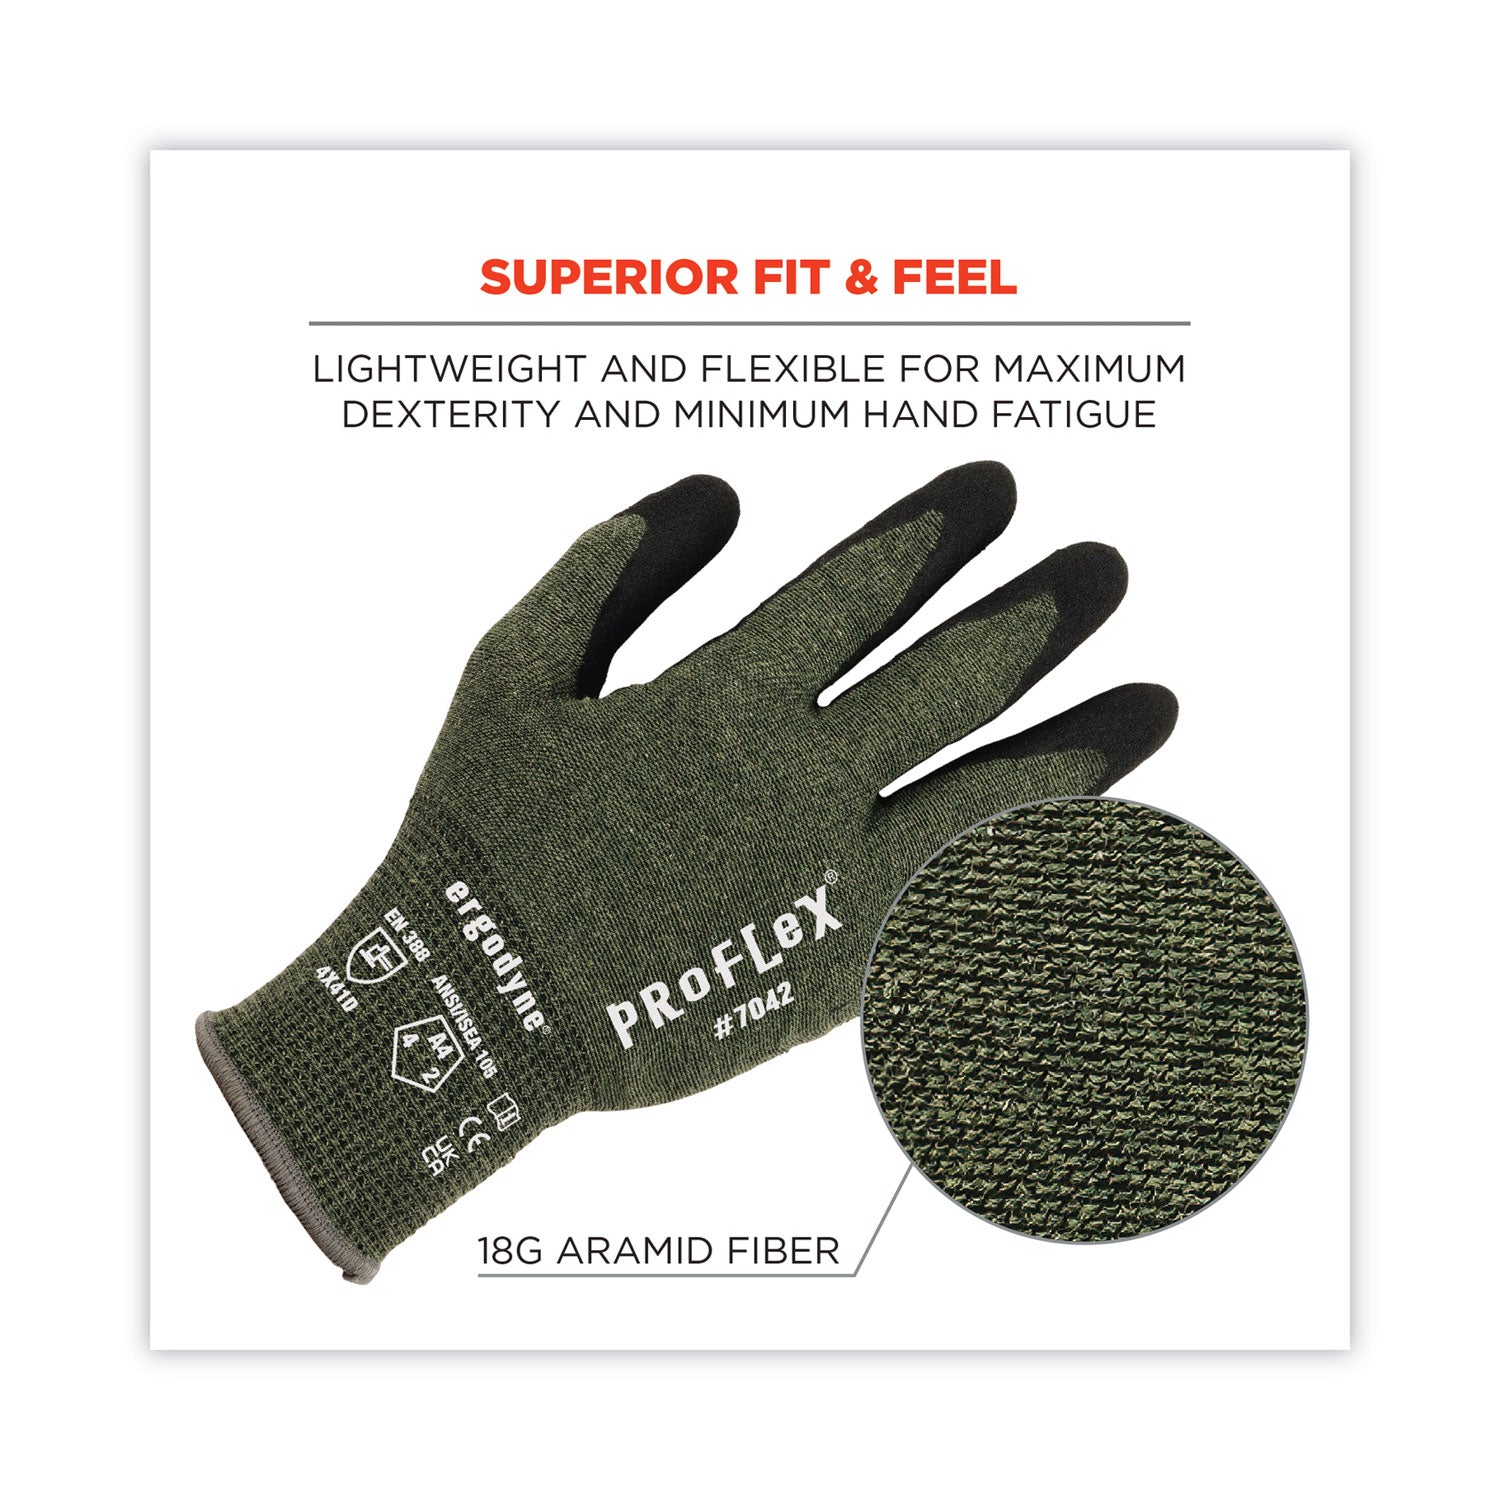 proflex-7042-ansi-a4-nitrile-coated-cr-gloves-green-large-pair-ships-in-1-3-business-days_ego10344 - 4